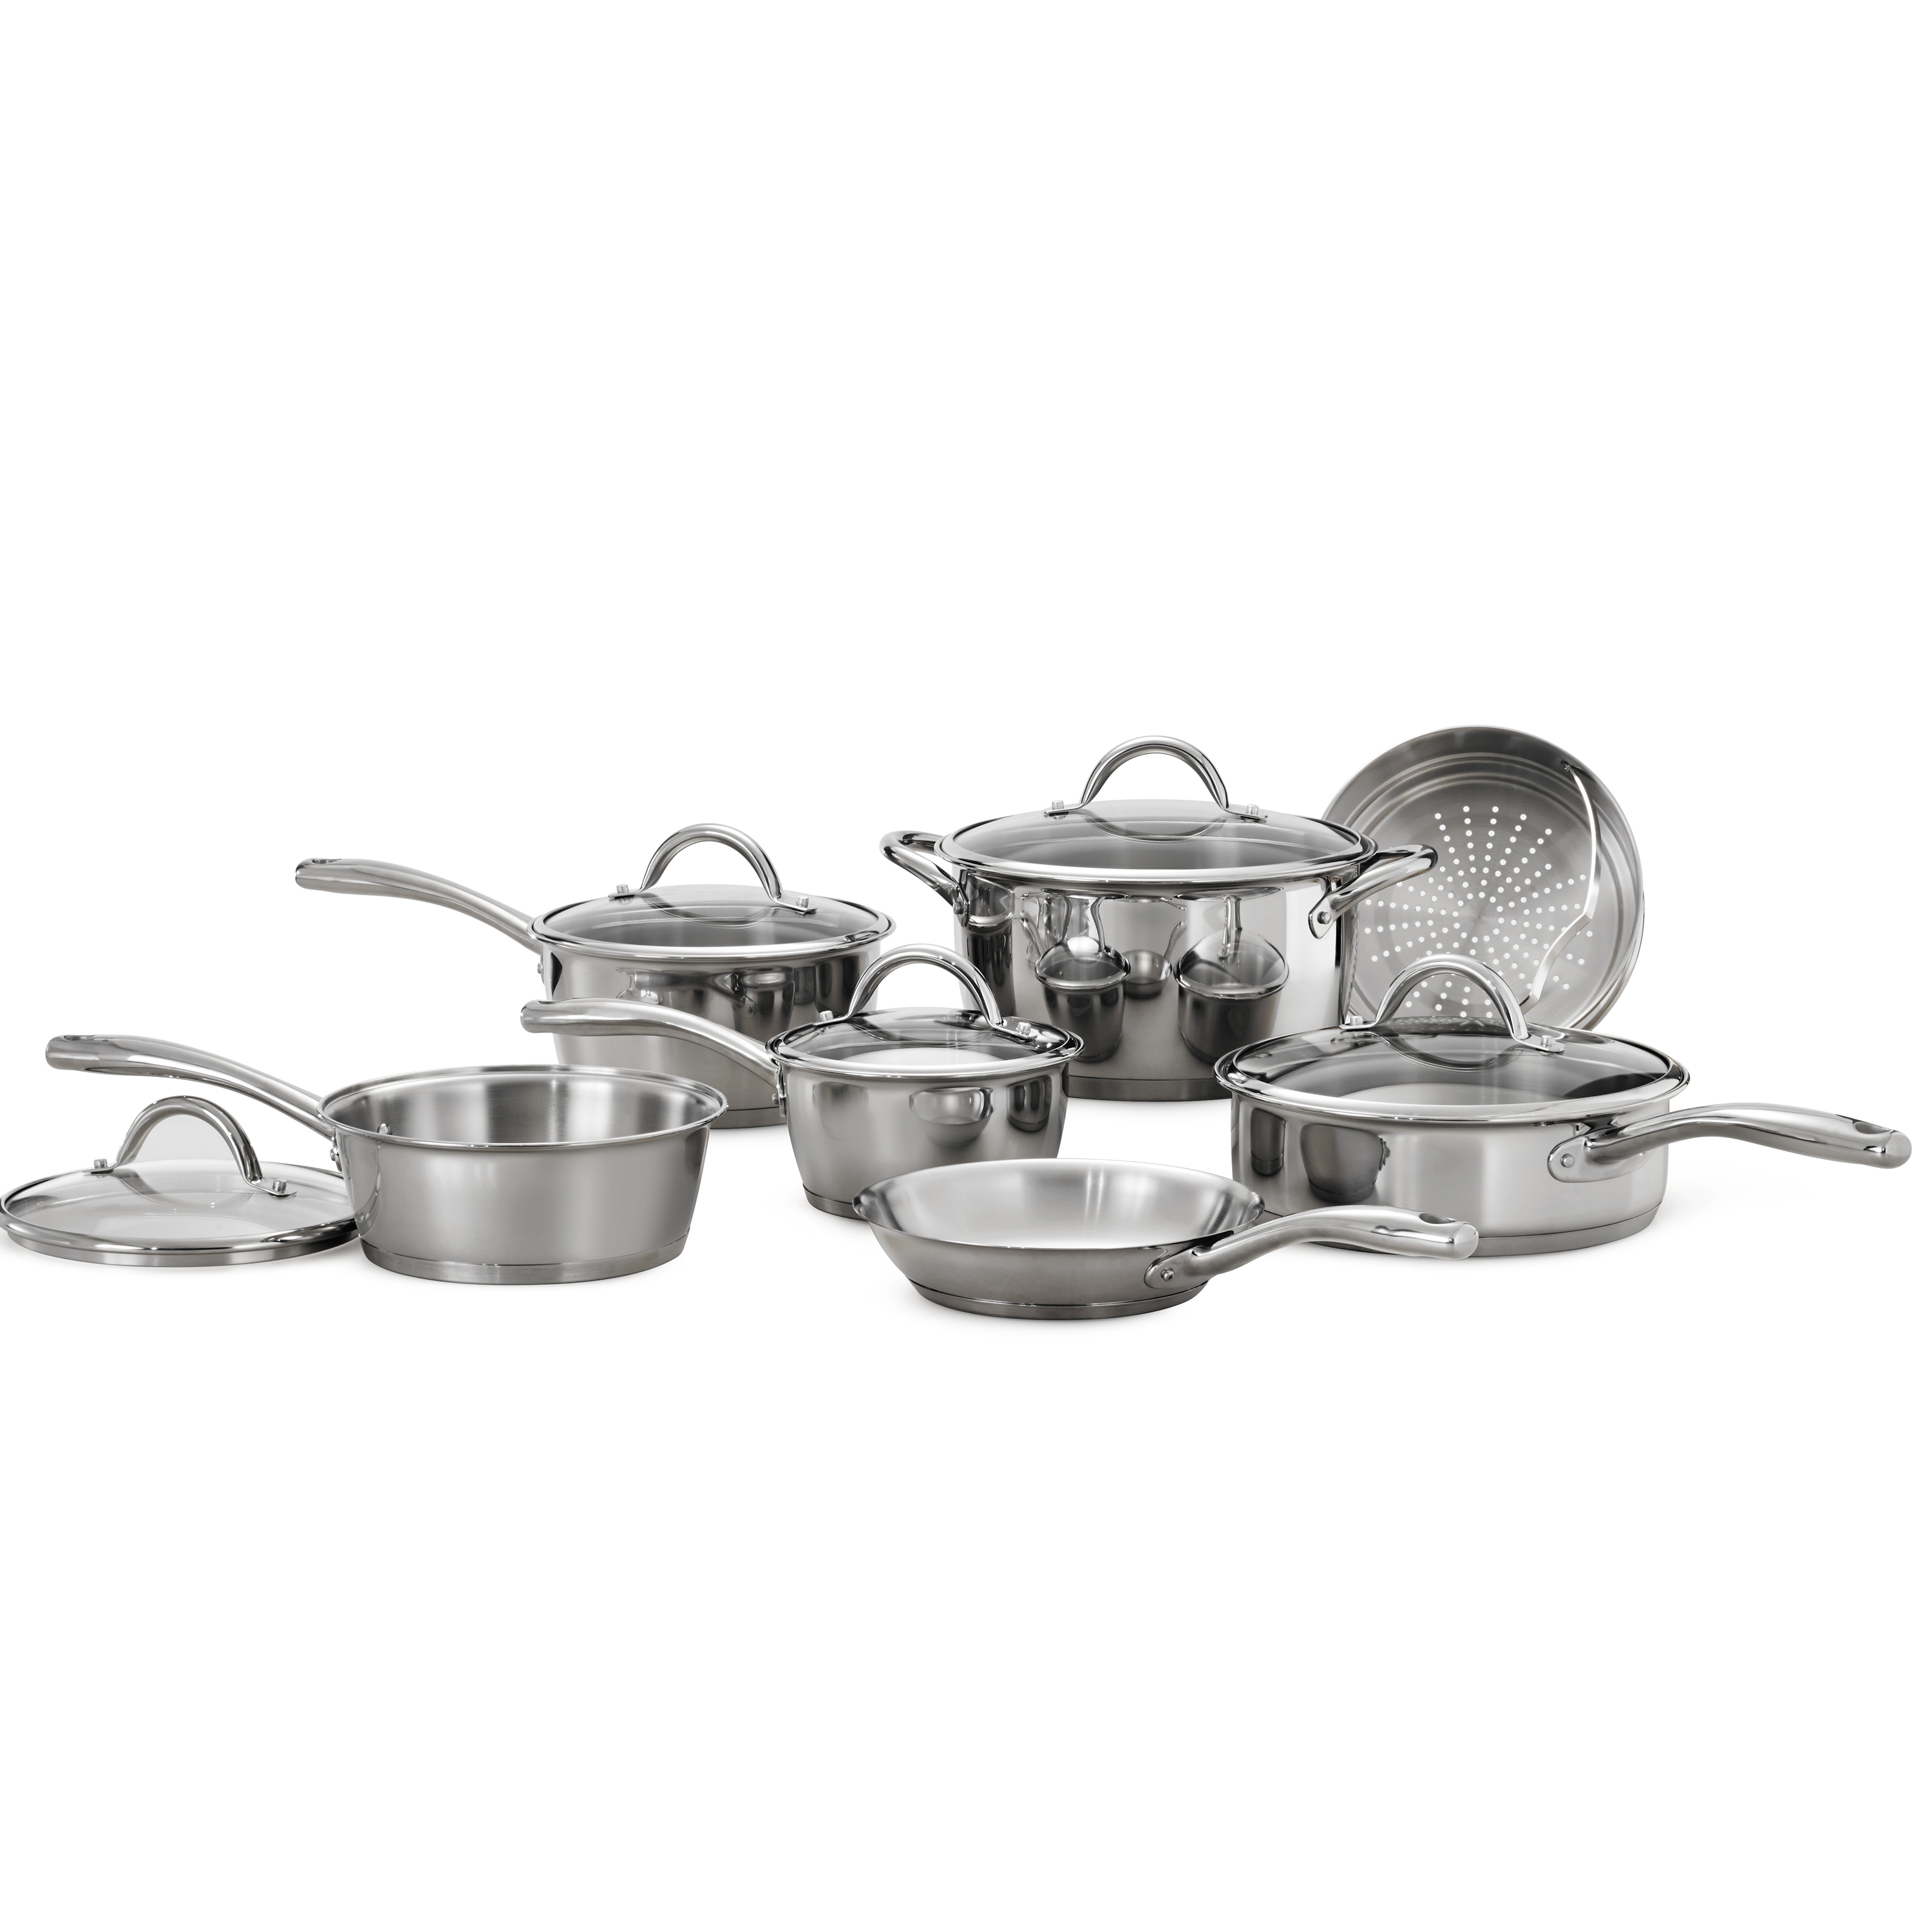 Tramontina Gourmet Stainless Steel Tri-Ply Base Cookware Set, 12 Piece - image 1 of 7